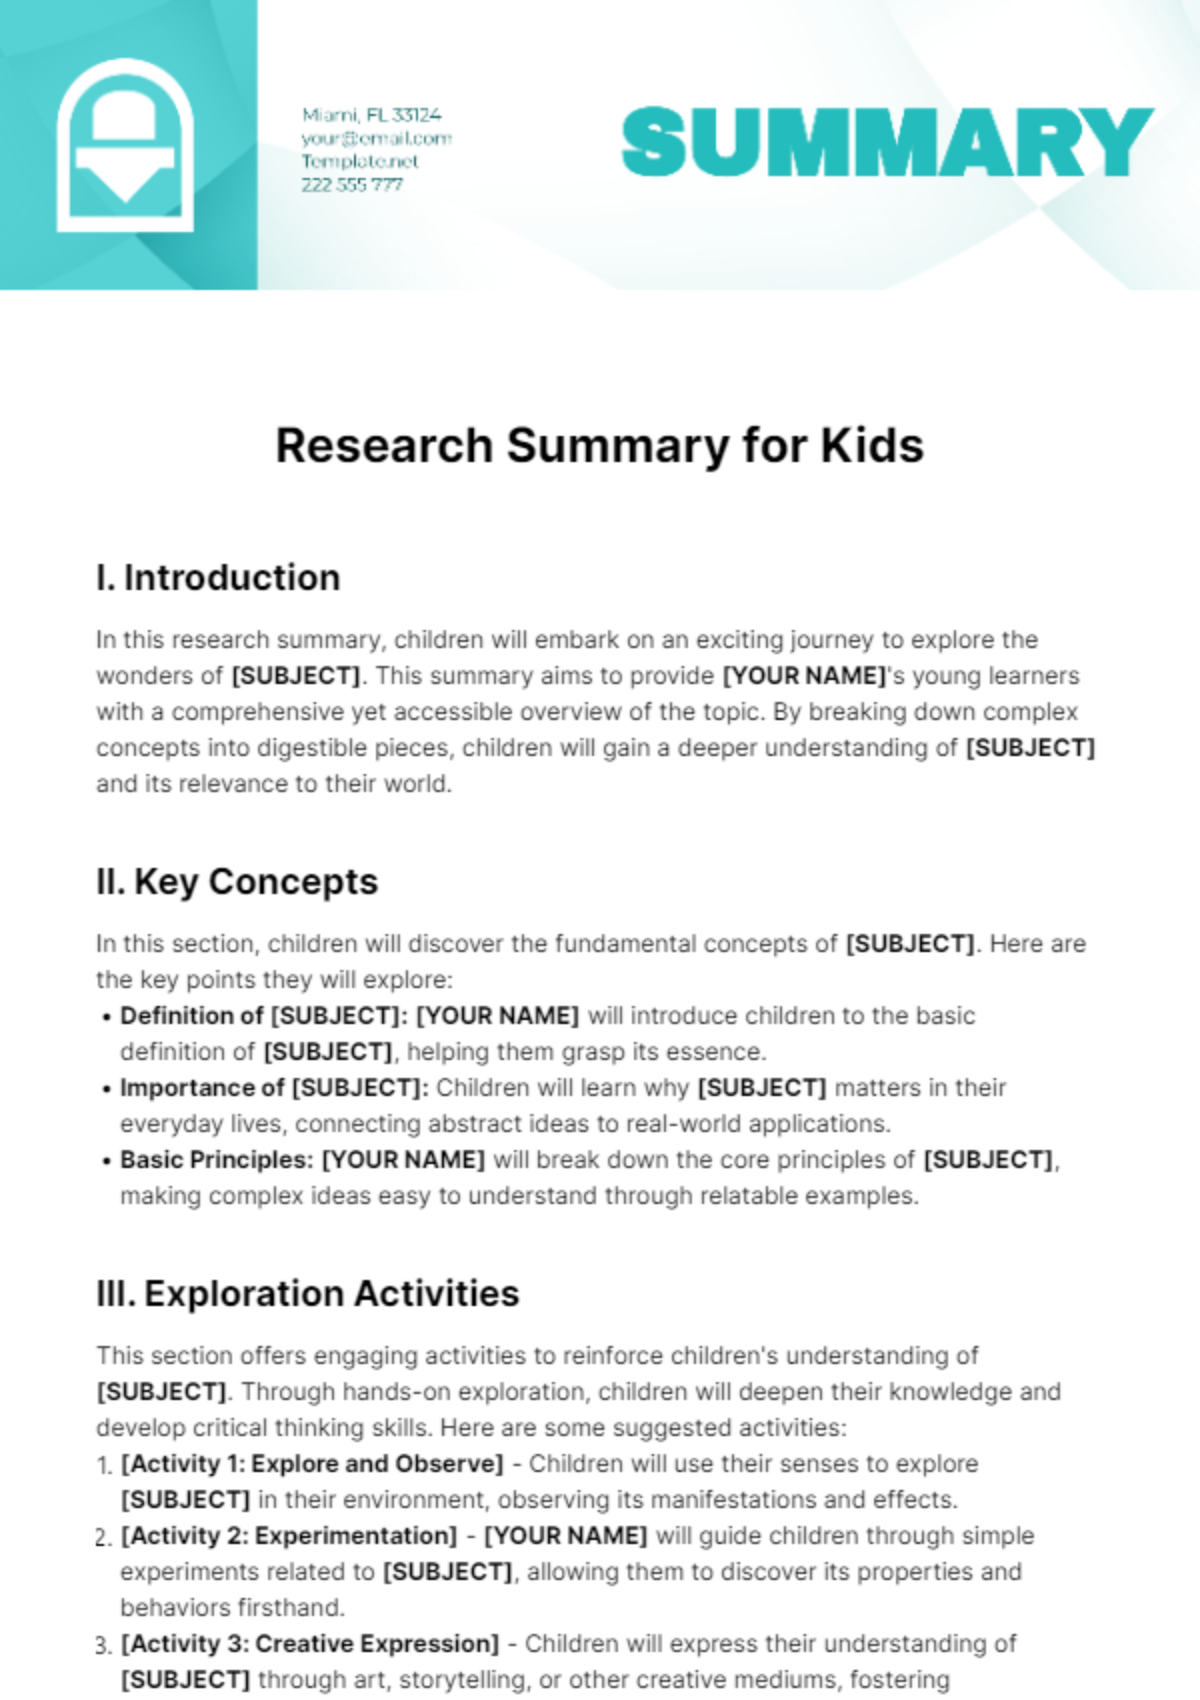 Research Summary for Kids Template